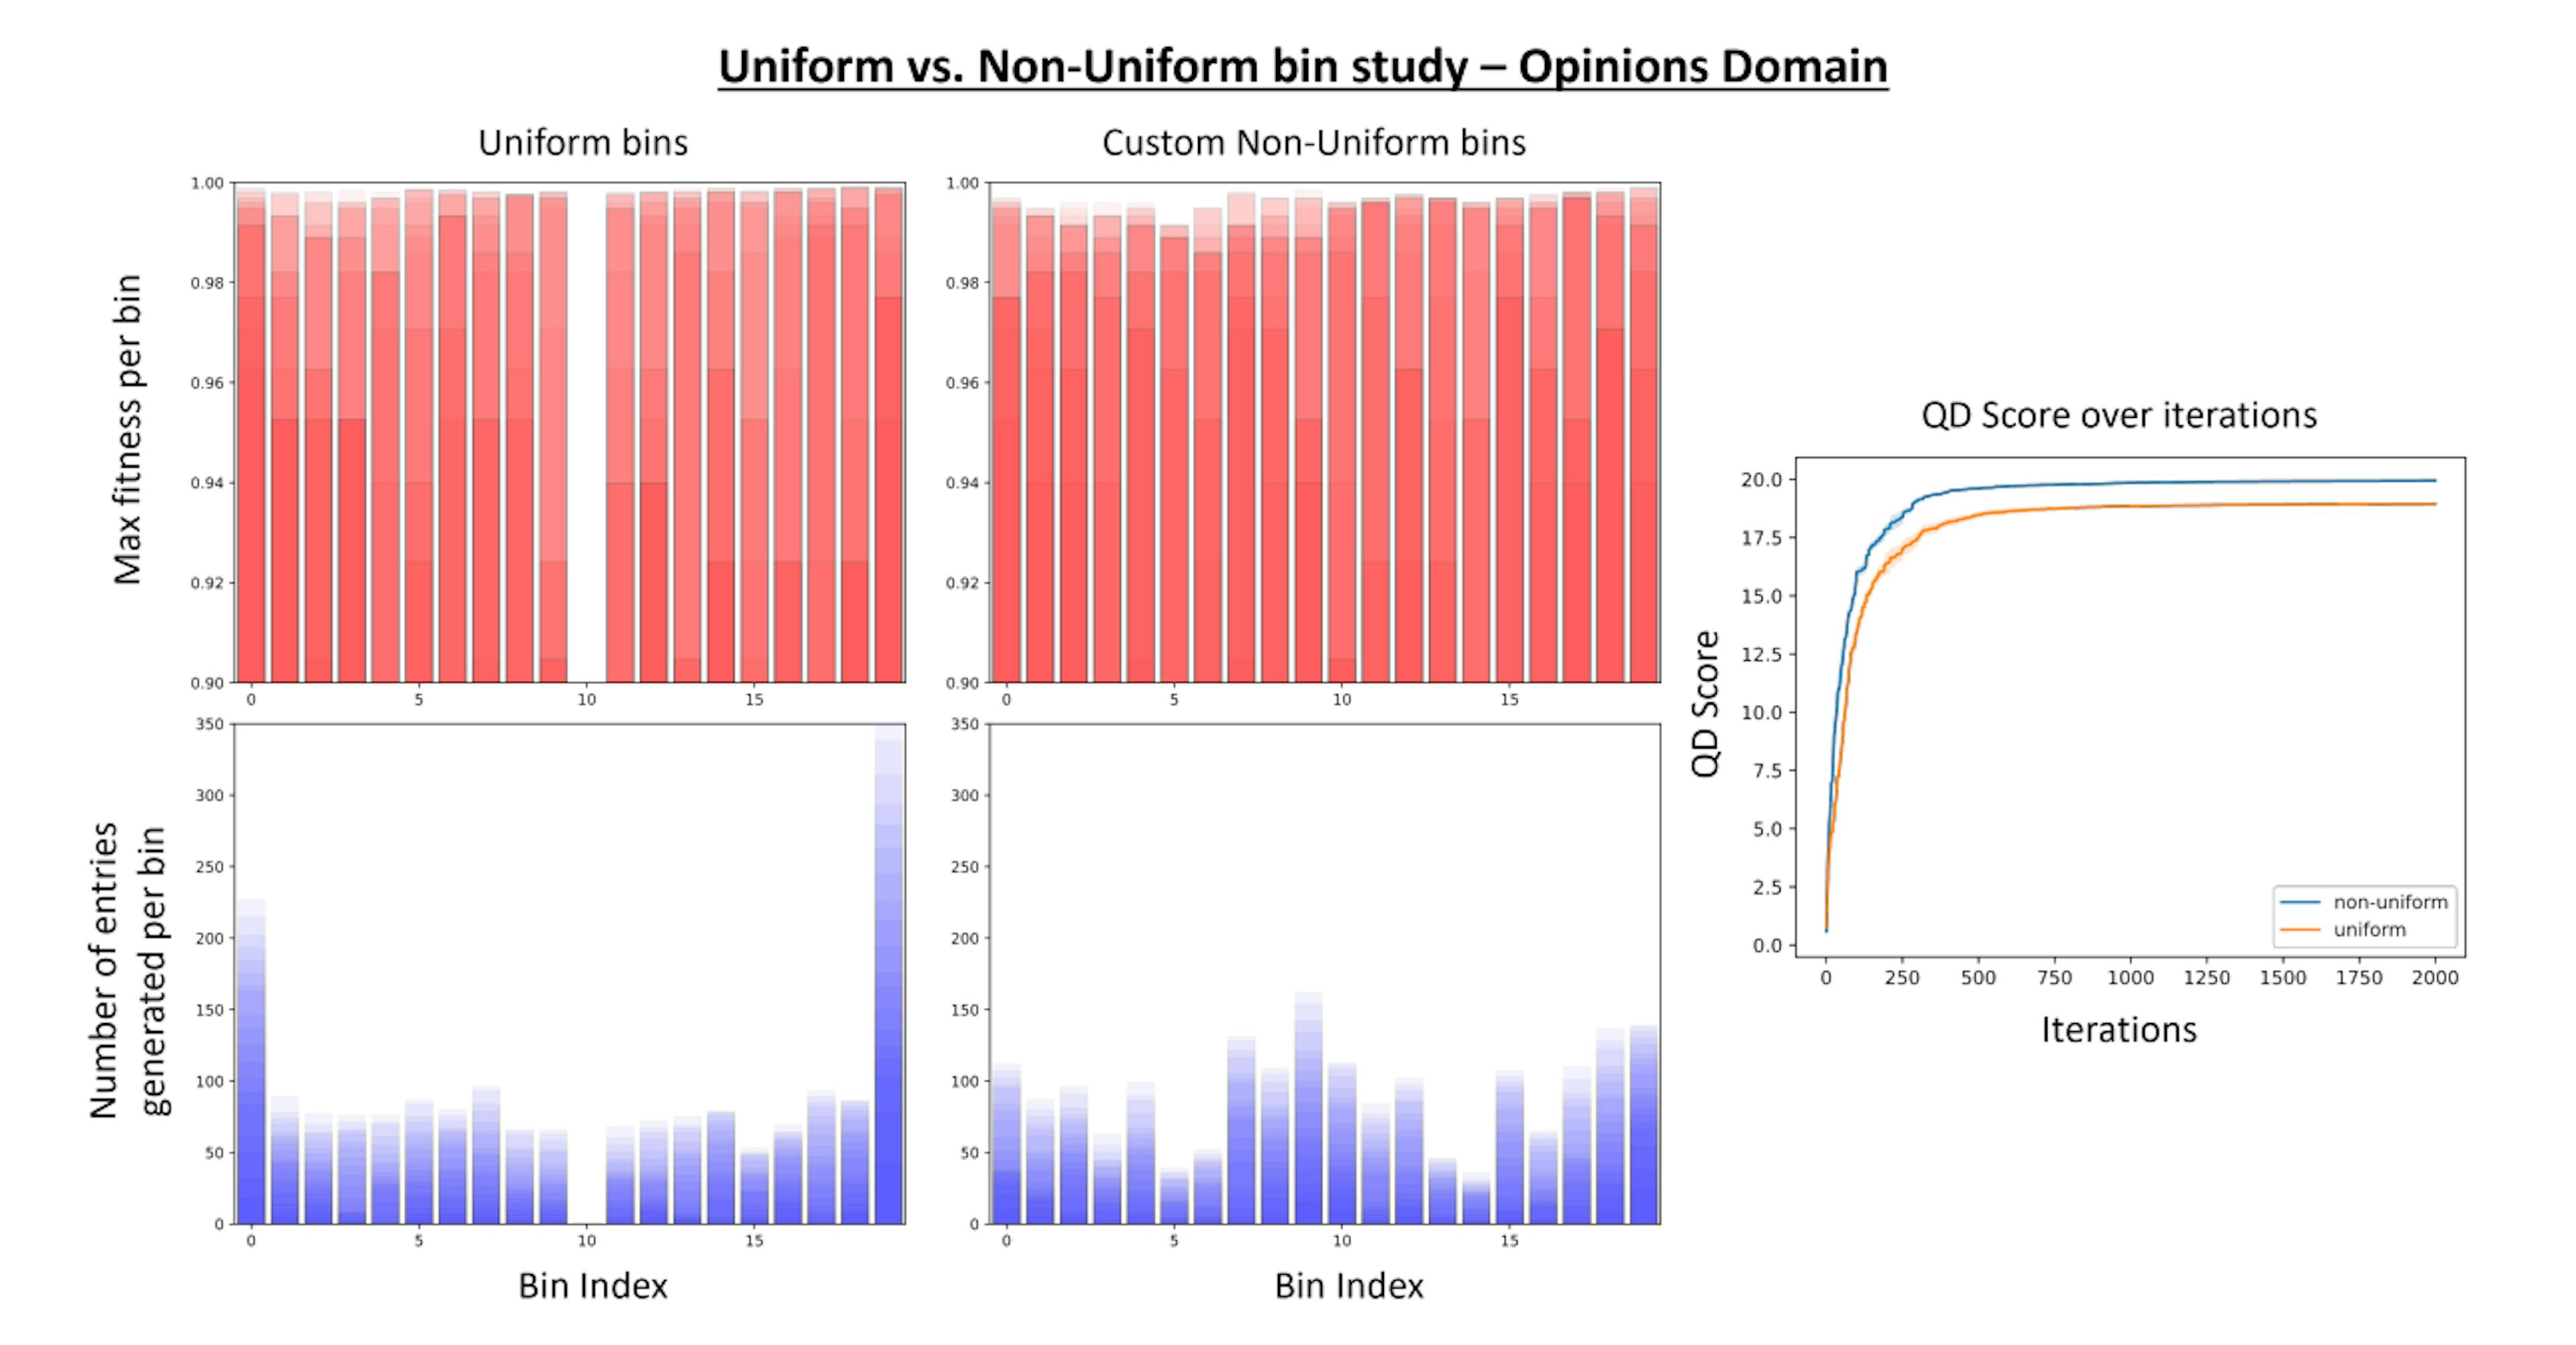 Figure 39: Uniform vs. custom non-uniform bins for Opinions domain. (Top) Maximum fitness achieved per bin over training iterations. Each translucent bar represents data captured every 100 iterations. Non-uniform bin setting has higher maximum fitness per bin. (Bottom) Number of entries generated per bin over training iterations. Each translucent bar represents data captured every 100 iterations. The non-uniform bin setting has a more even spread of entries generated across bins. (Right) QD score is achieved by each bin setting over training iterations. Non-uniform bin setting achieves a higher QD score than uniform bin setting.